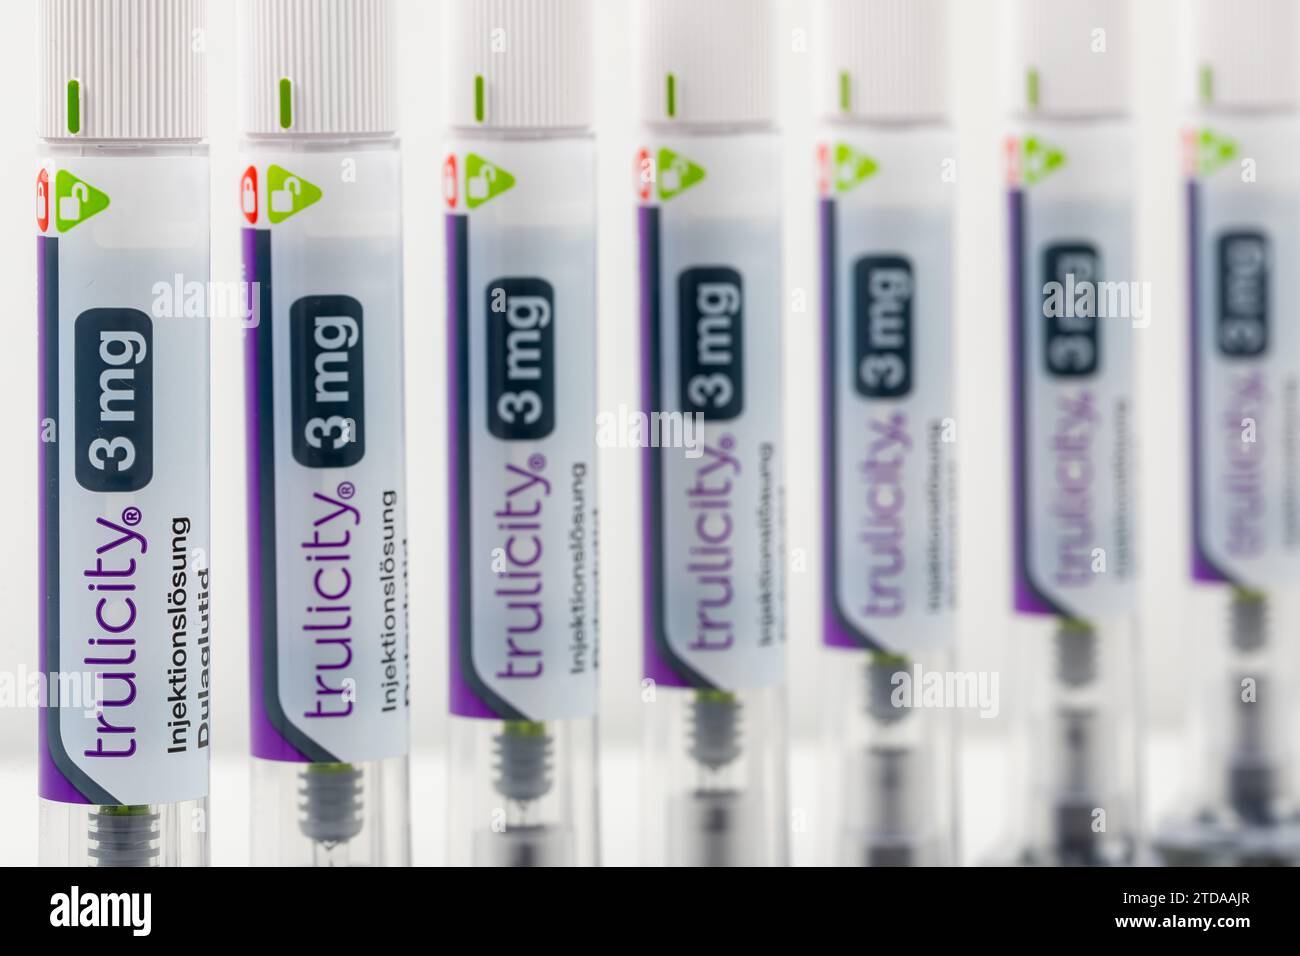 Row of Trulicity Injection Pens - Diabetes Medication and Medical Supplies, Selective Focus Stock Photo